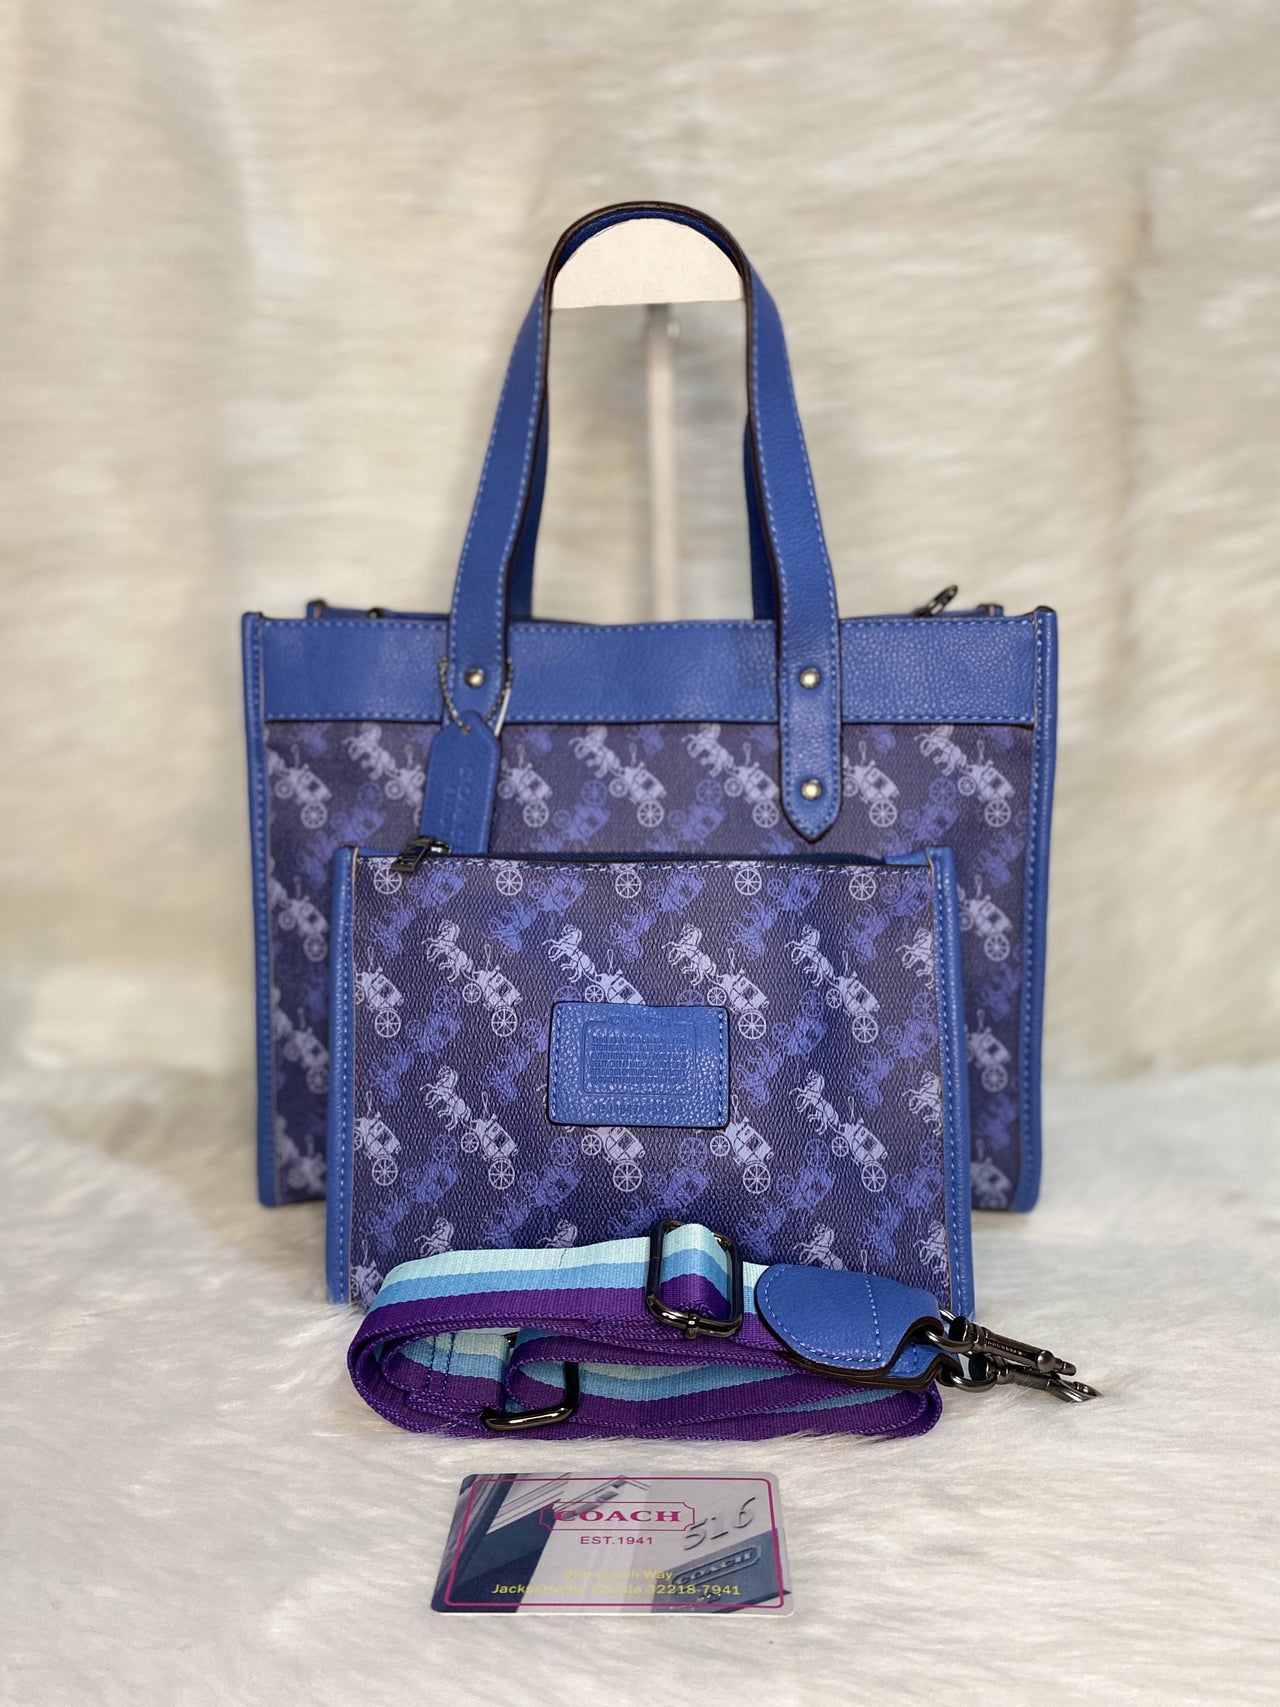 CH1013 Tote Bag with Pouch in Horse and Carriage Print